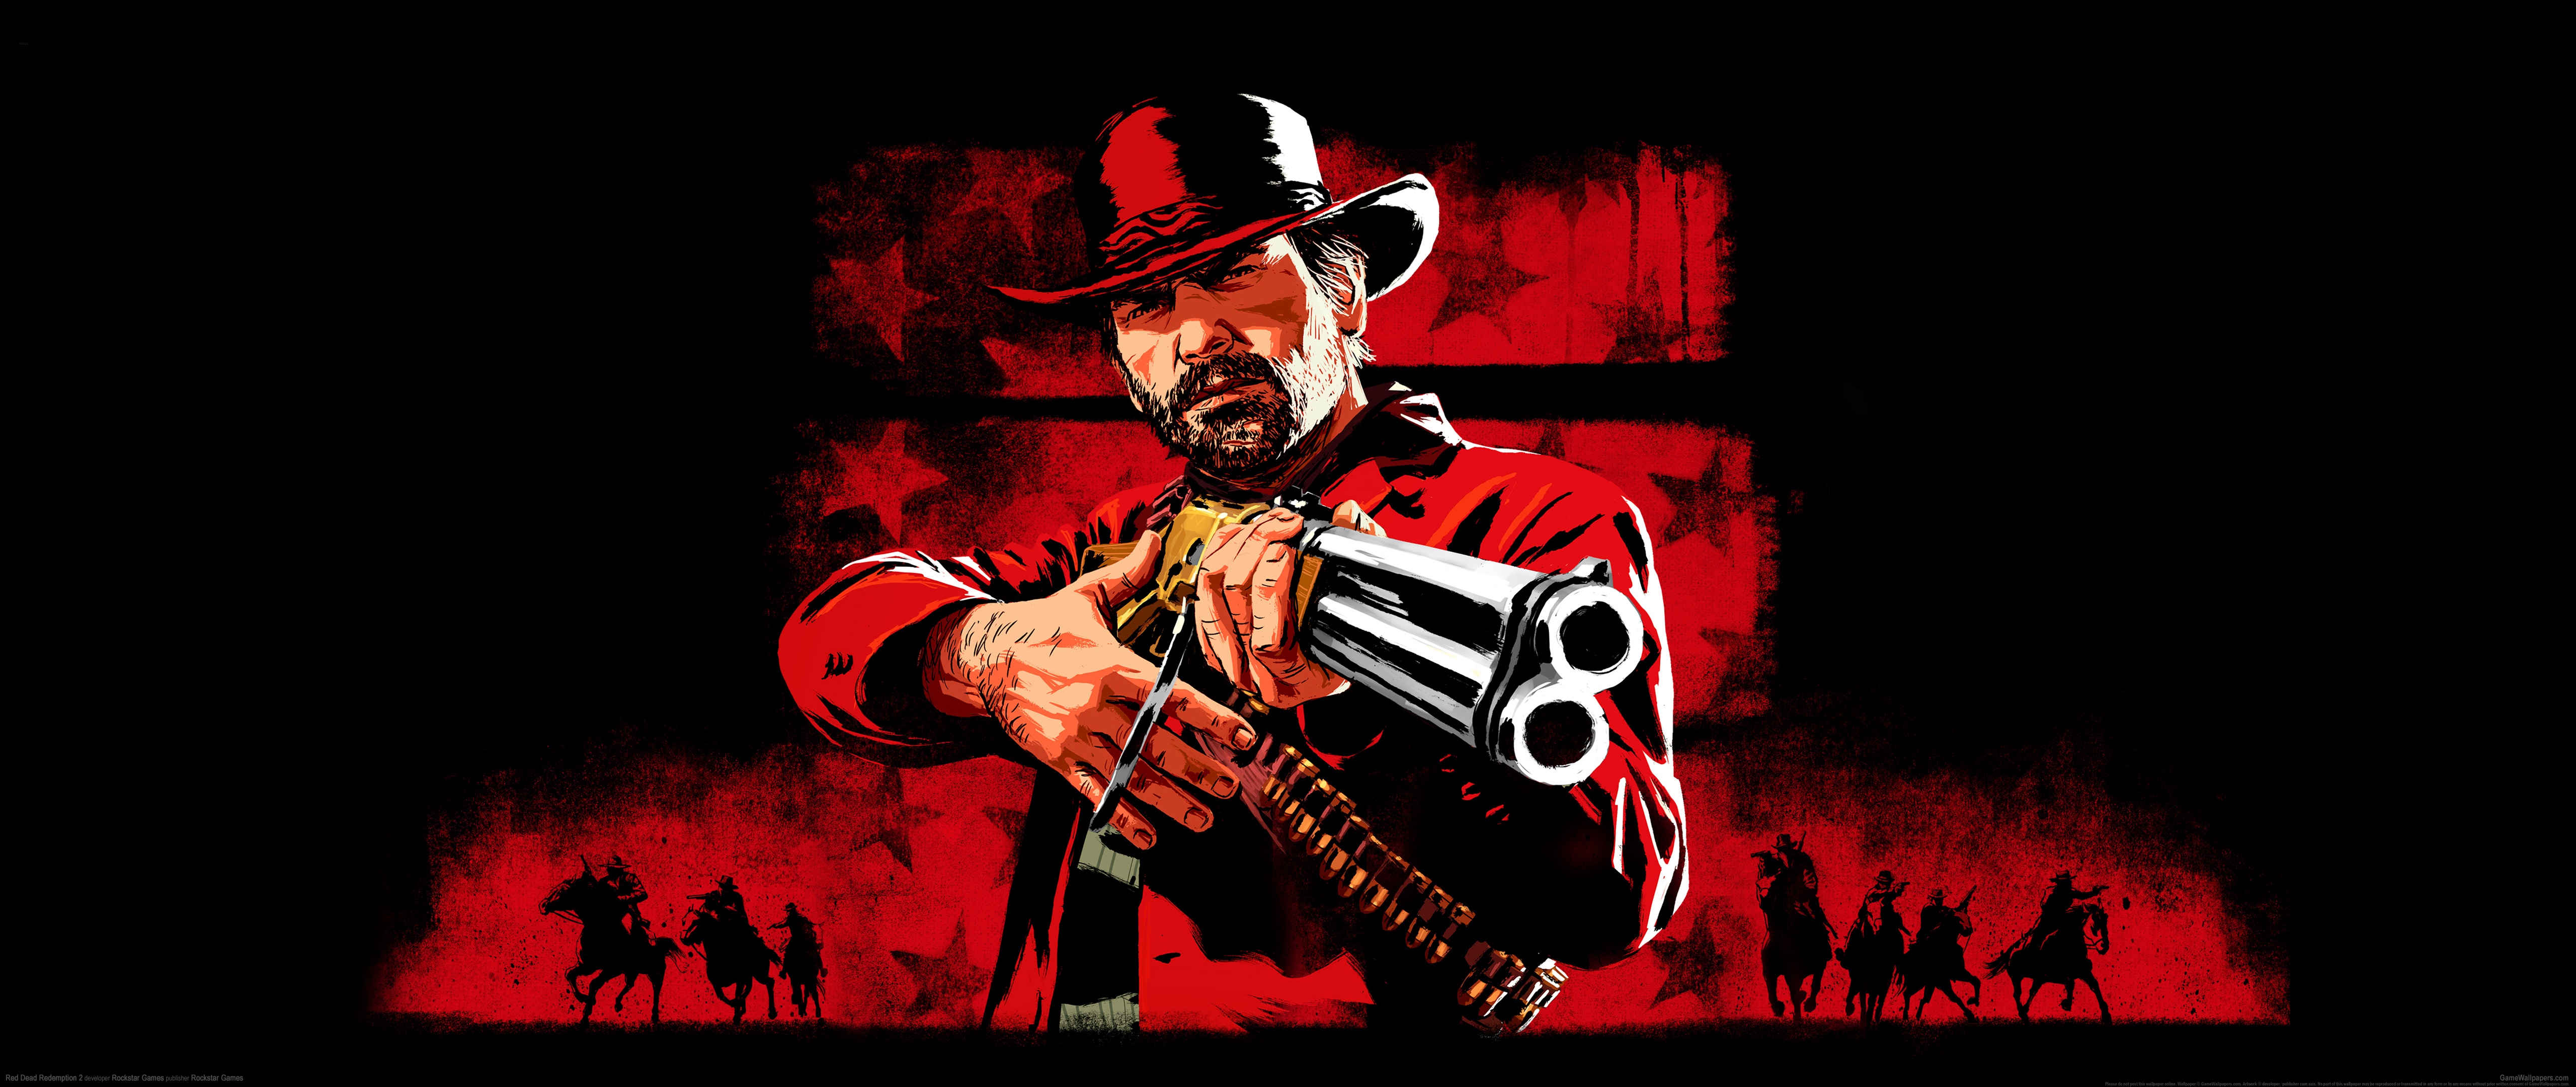 Red Dead Redemption 2 5120x2160 wallpaper or background 04